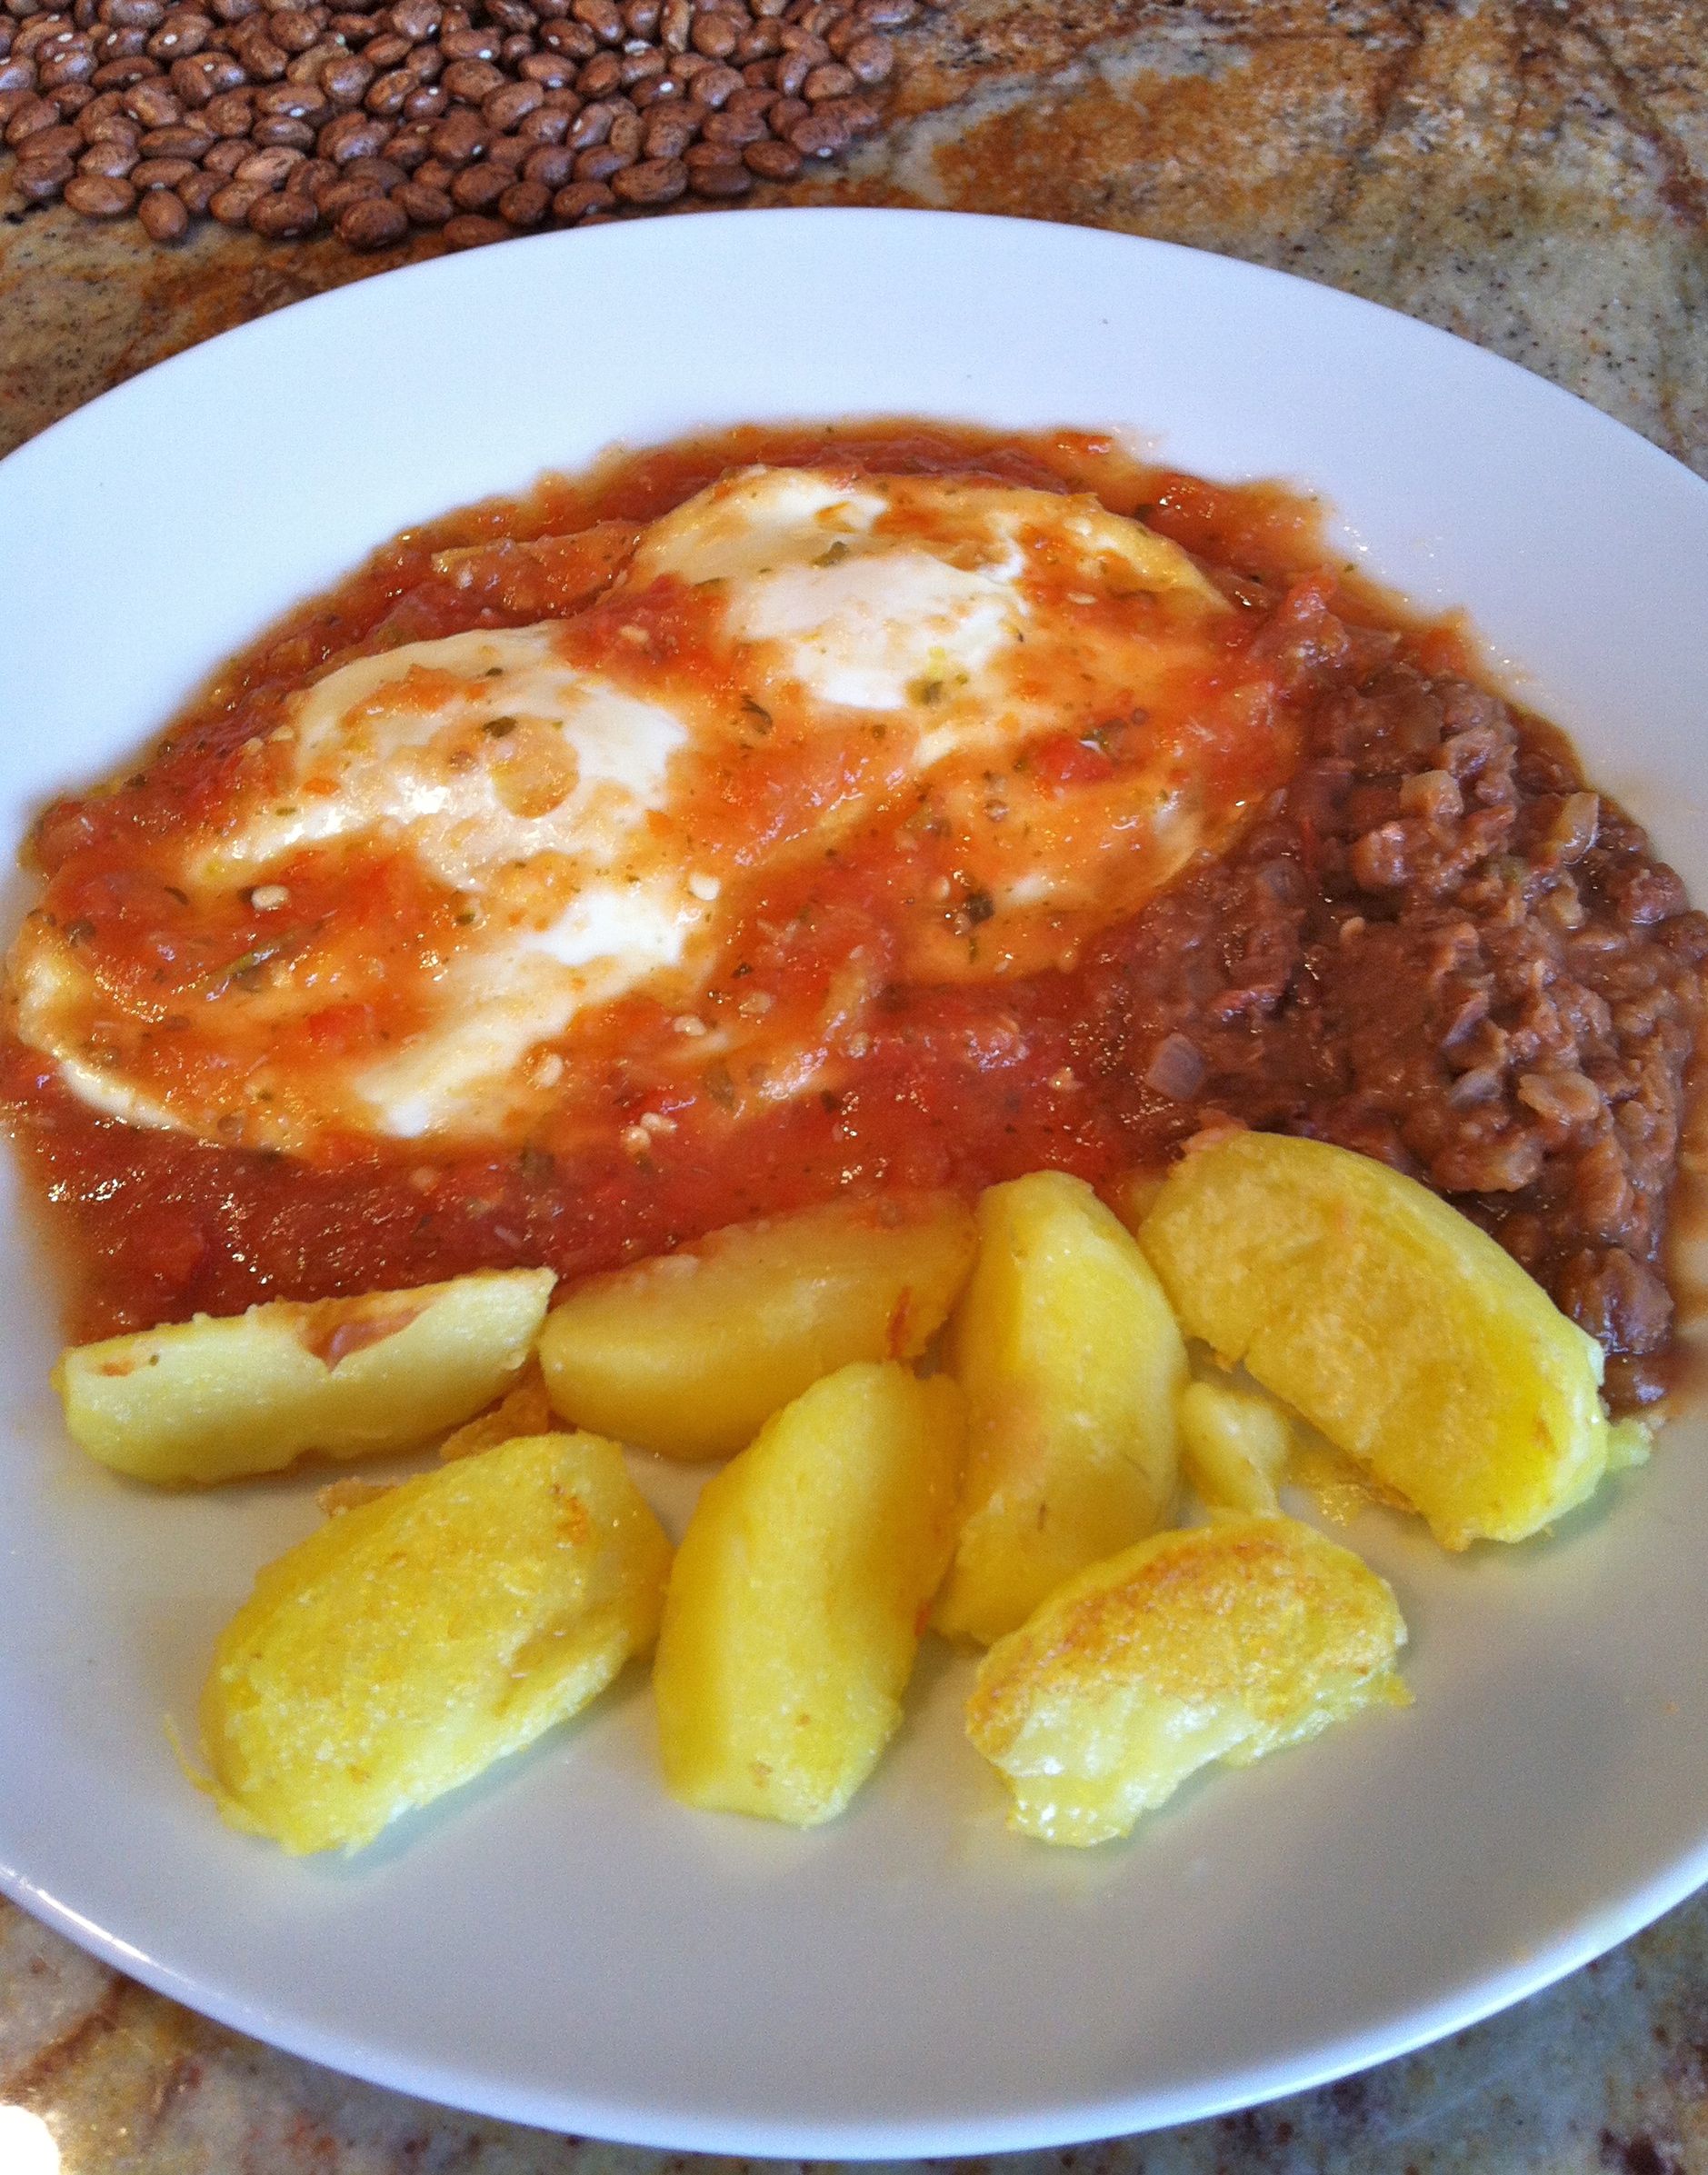 Huevos Rancheros made with fresh ingredients, little fat